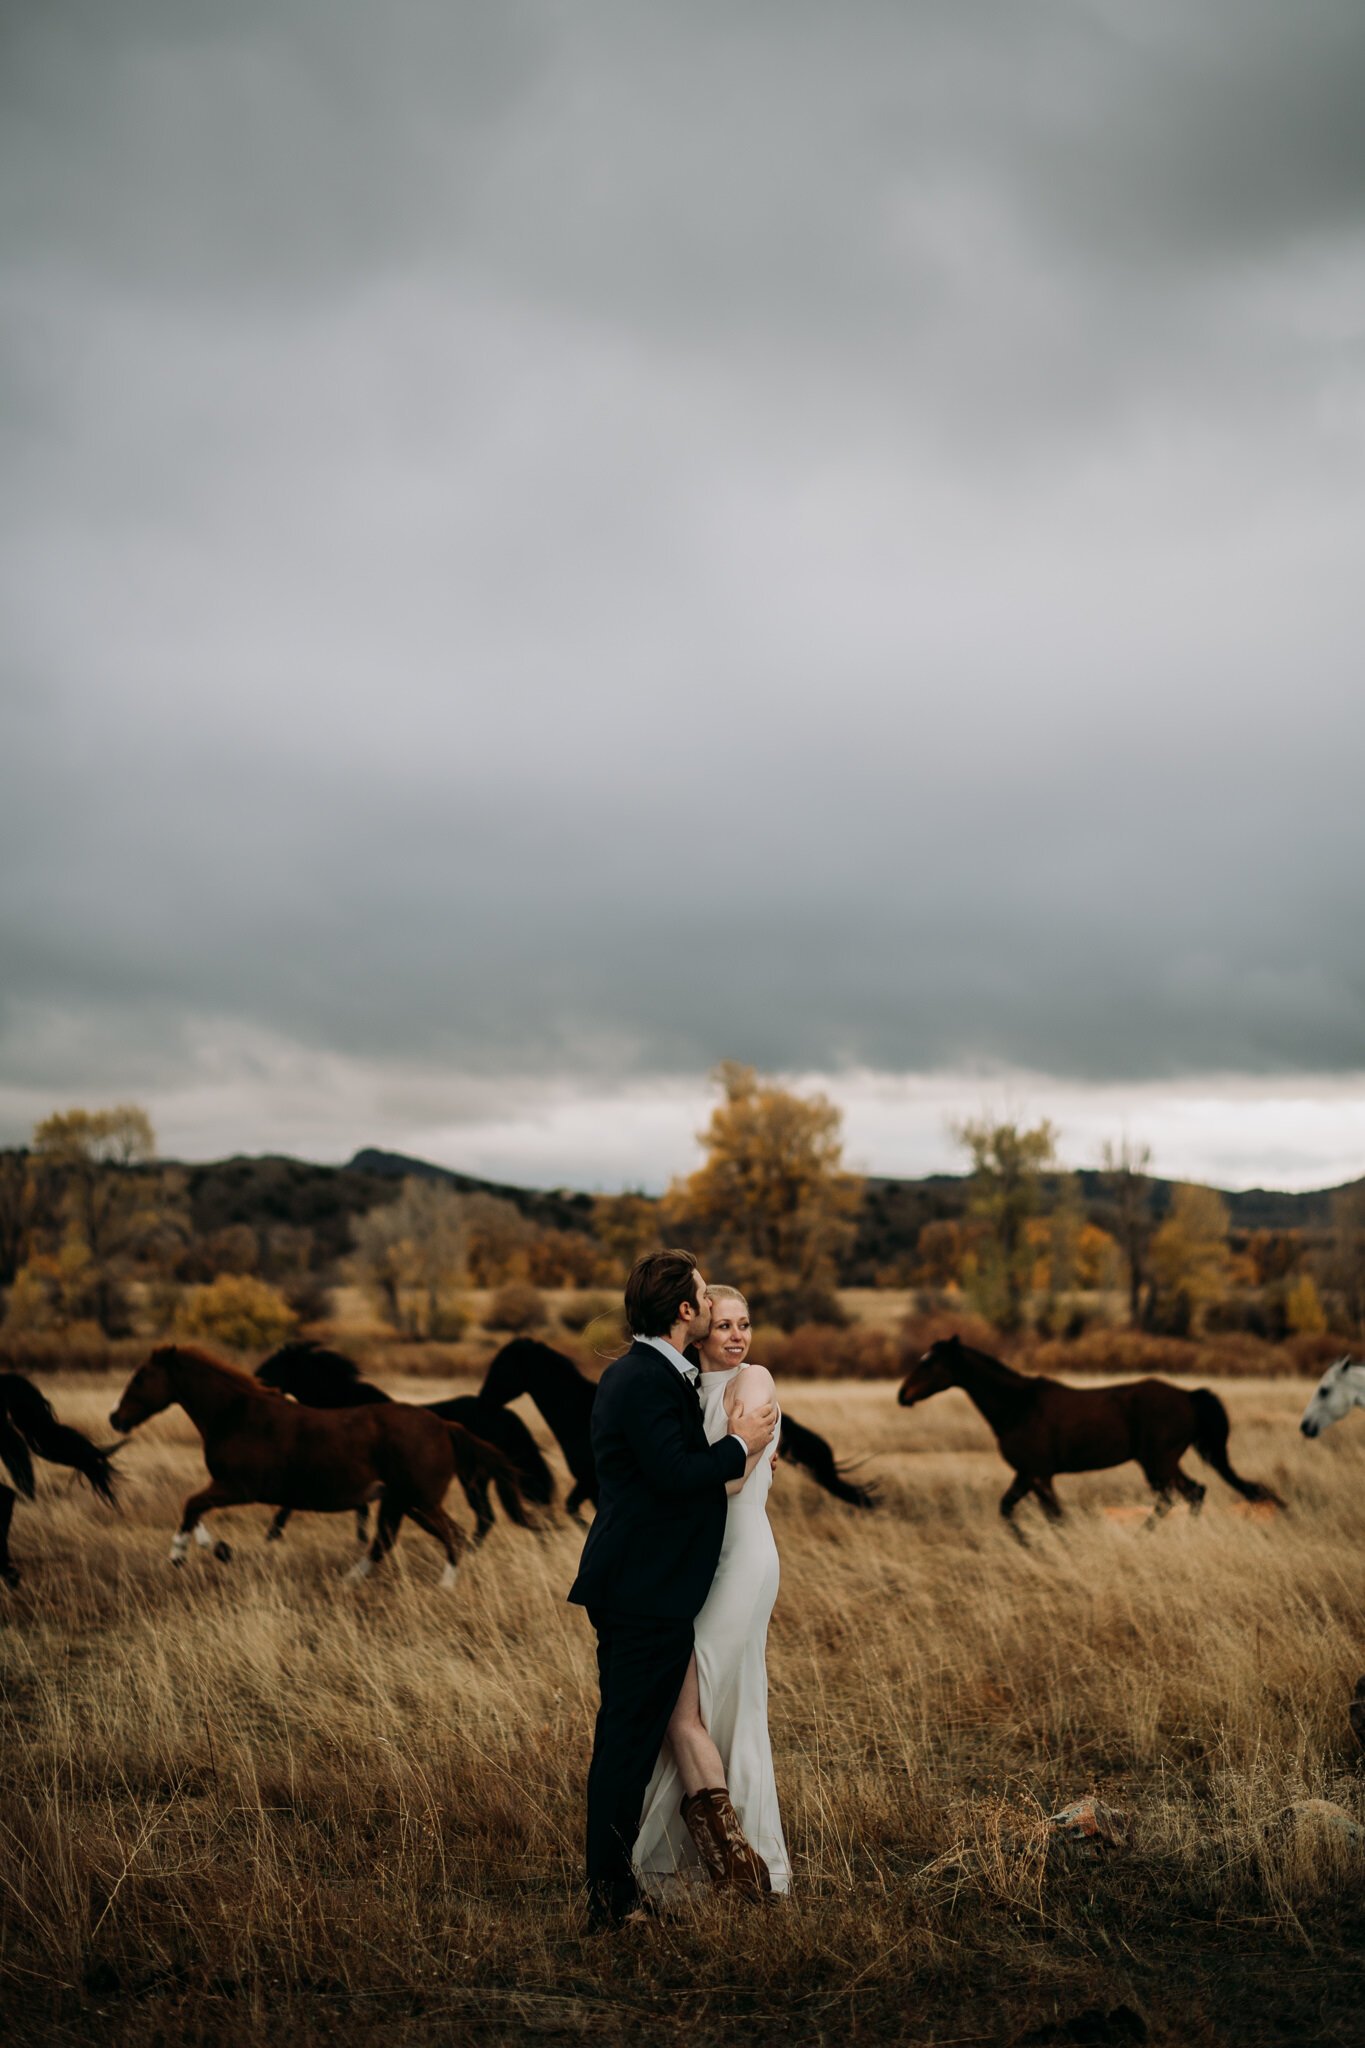 Bride and groom in wedding attire in grassy field with hoses running in the background and the big Wyoming grey sky.